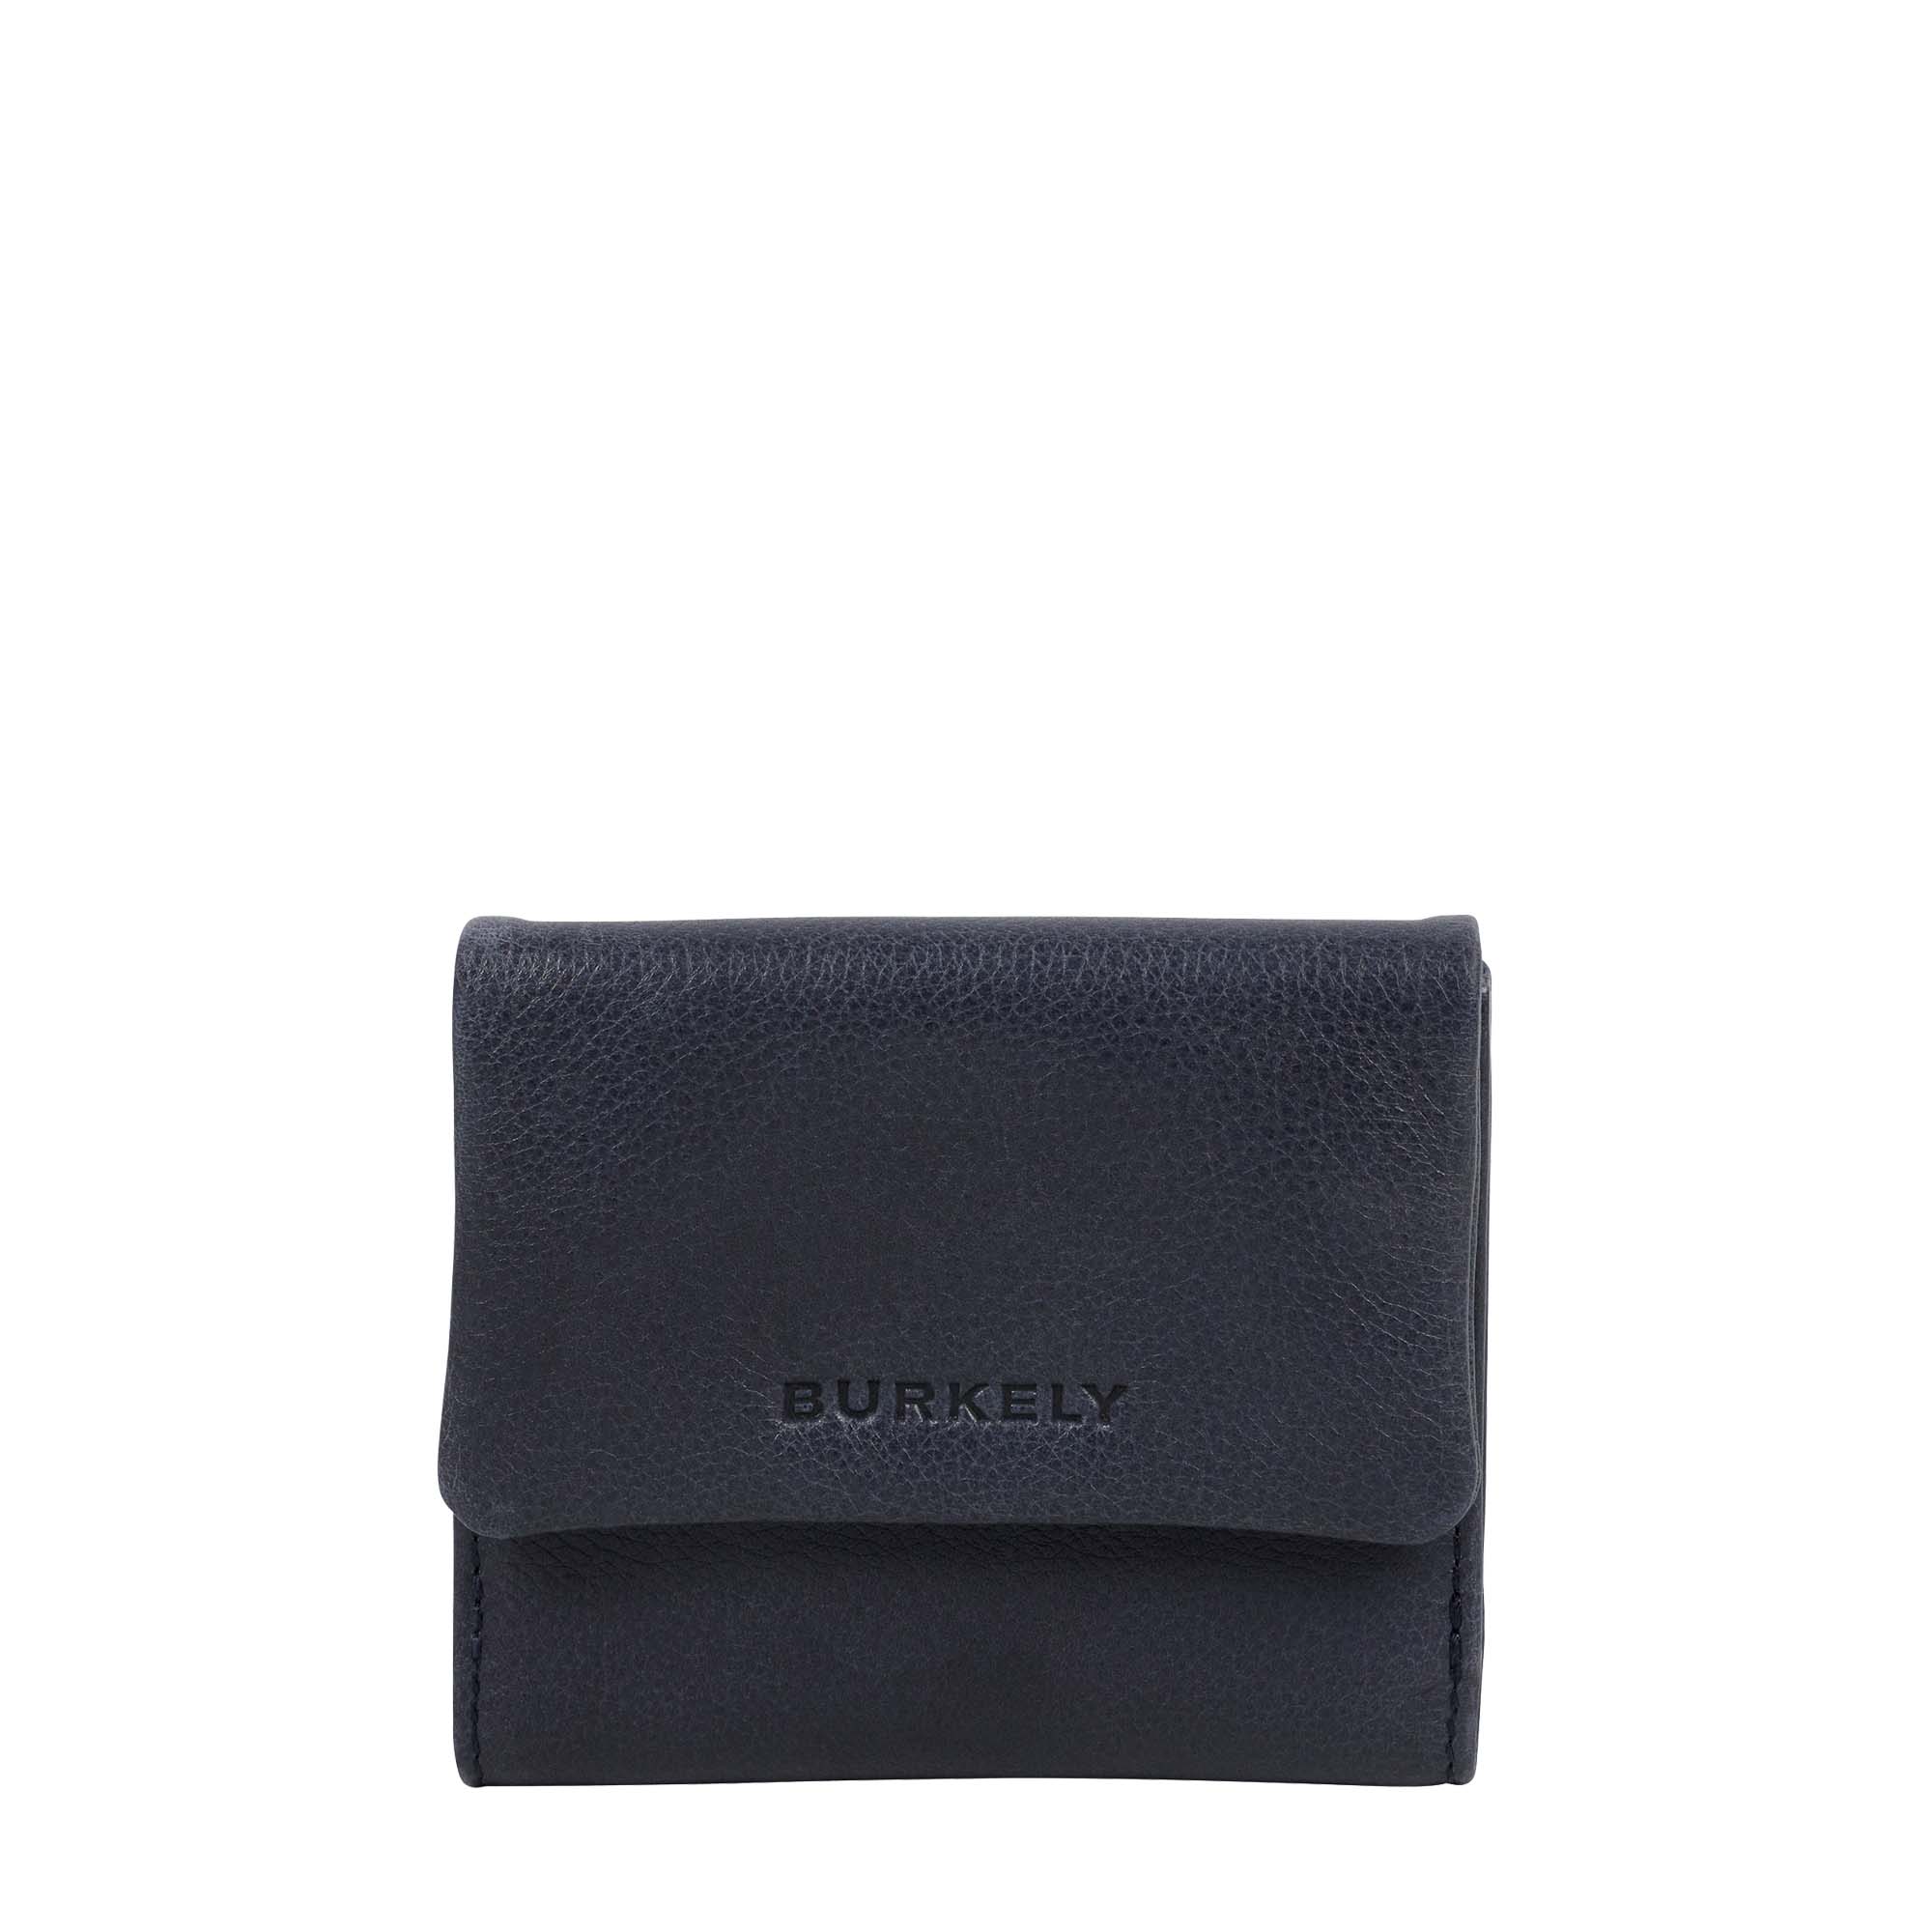 BURKELY JUST JOLIE TRIFOLD WALLET